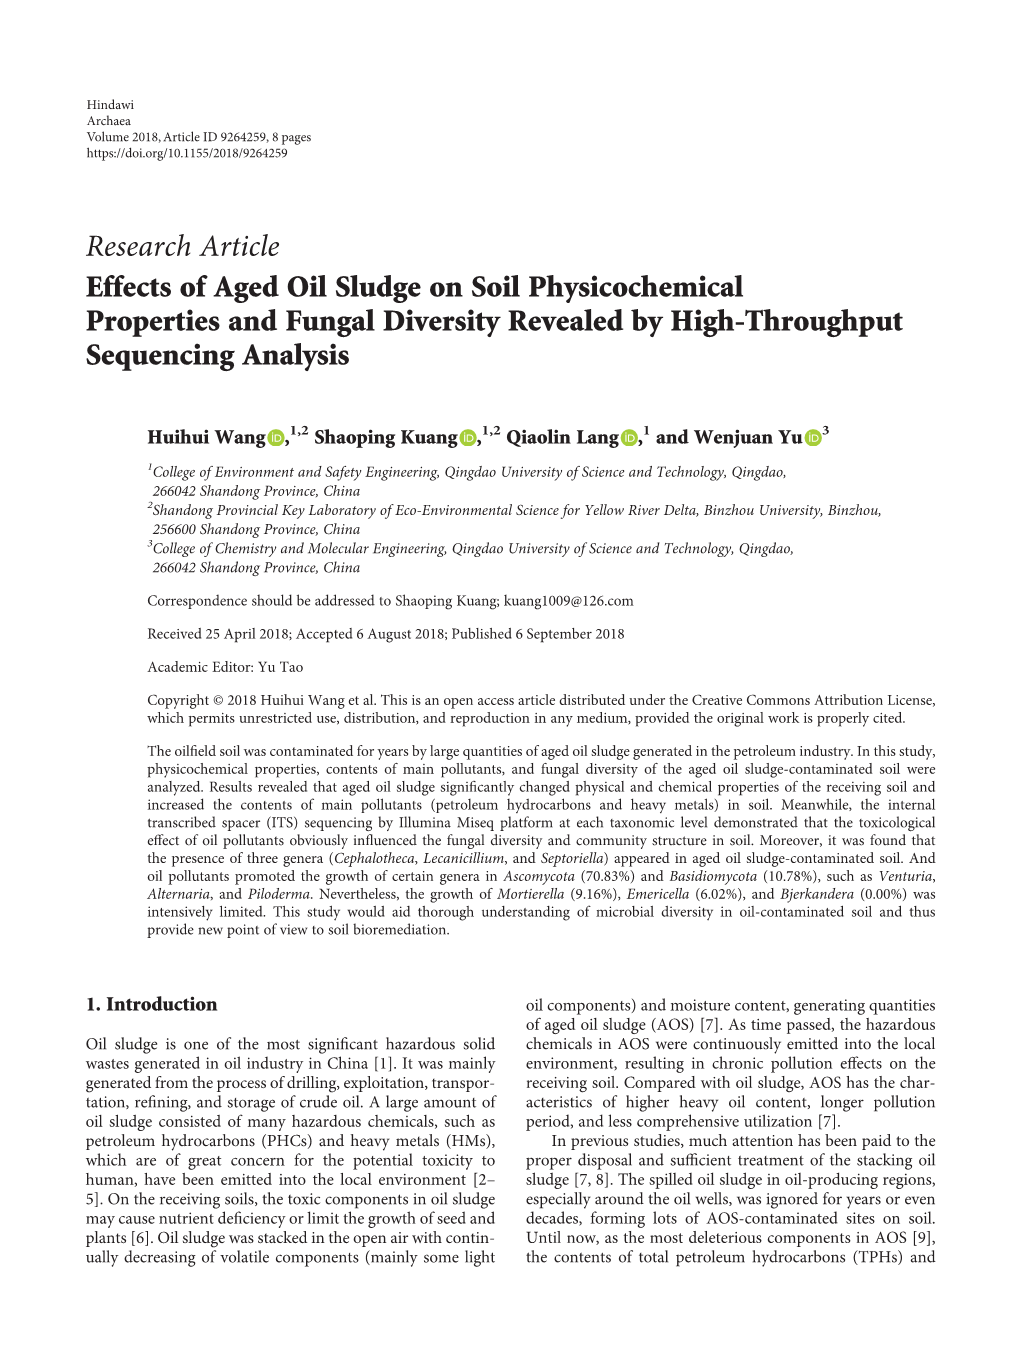 Effects of Aged Oil Sludge on Soil Physicochemical Properties and Fungal Diversity Revealed by High-Throughput Sequencing Analysis